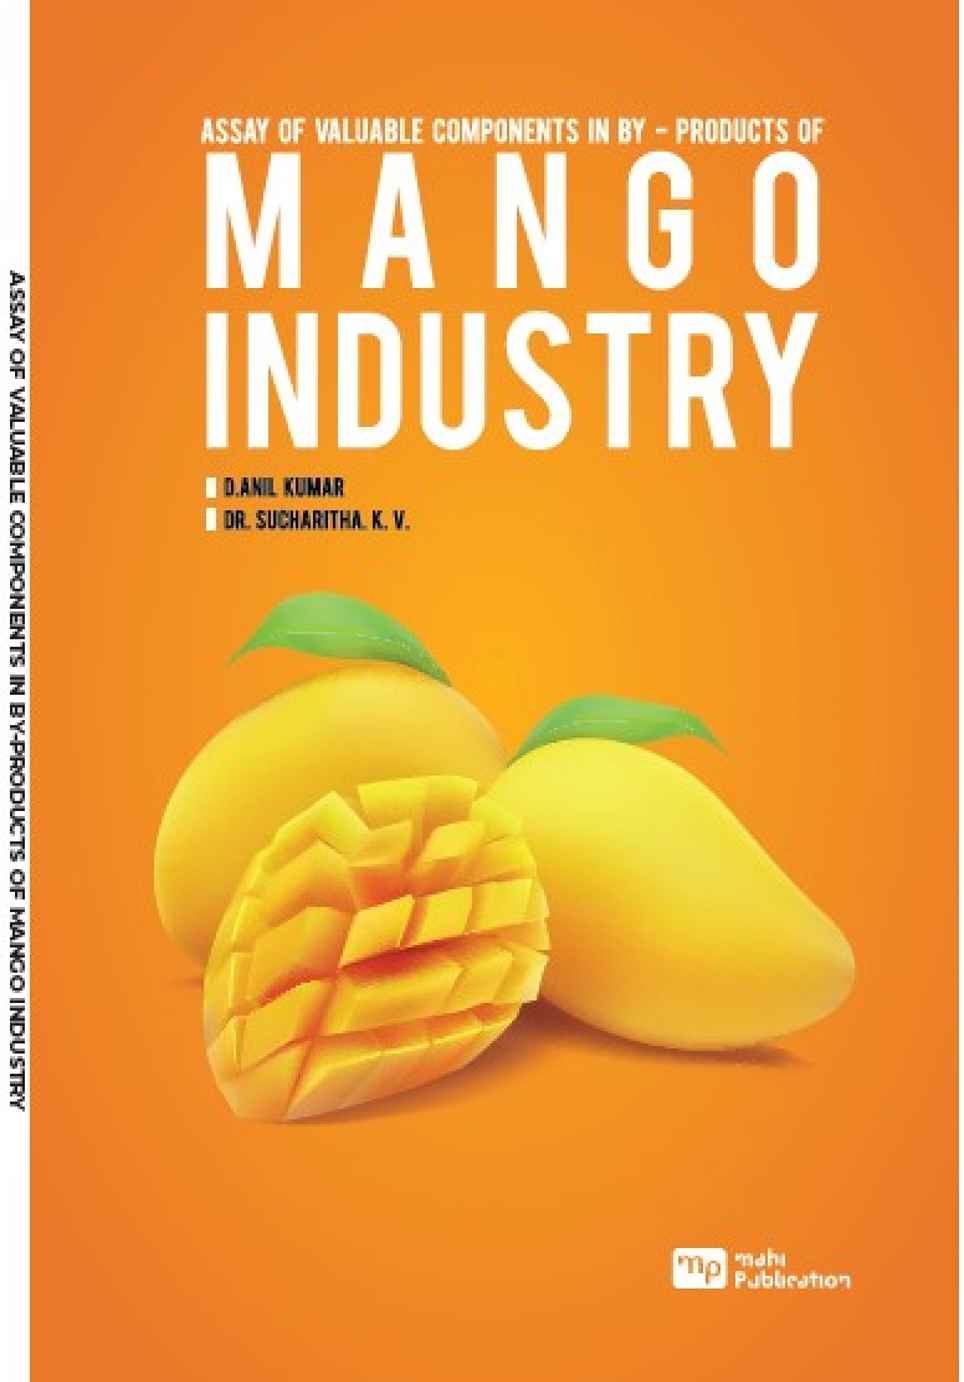 Assay Of Valuable Components In By-Products Of Mango Industry